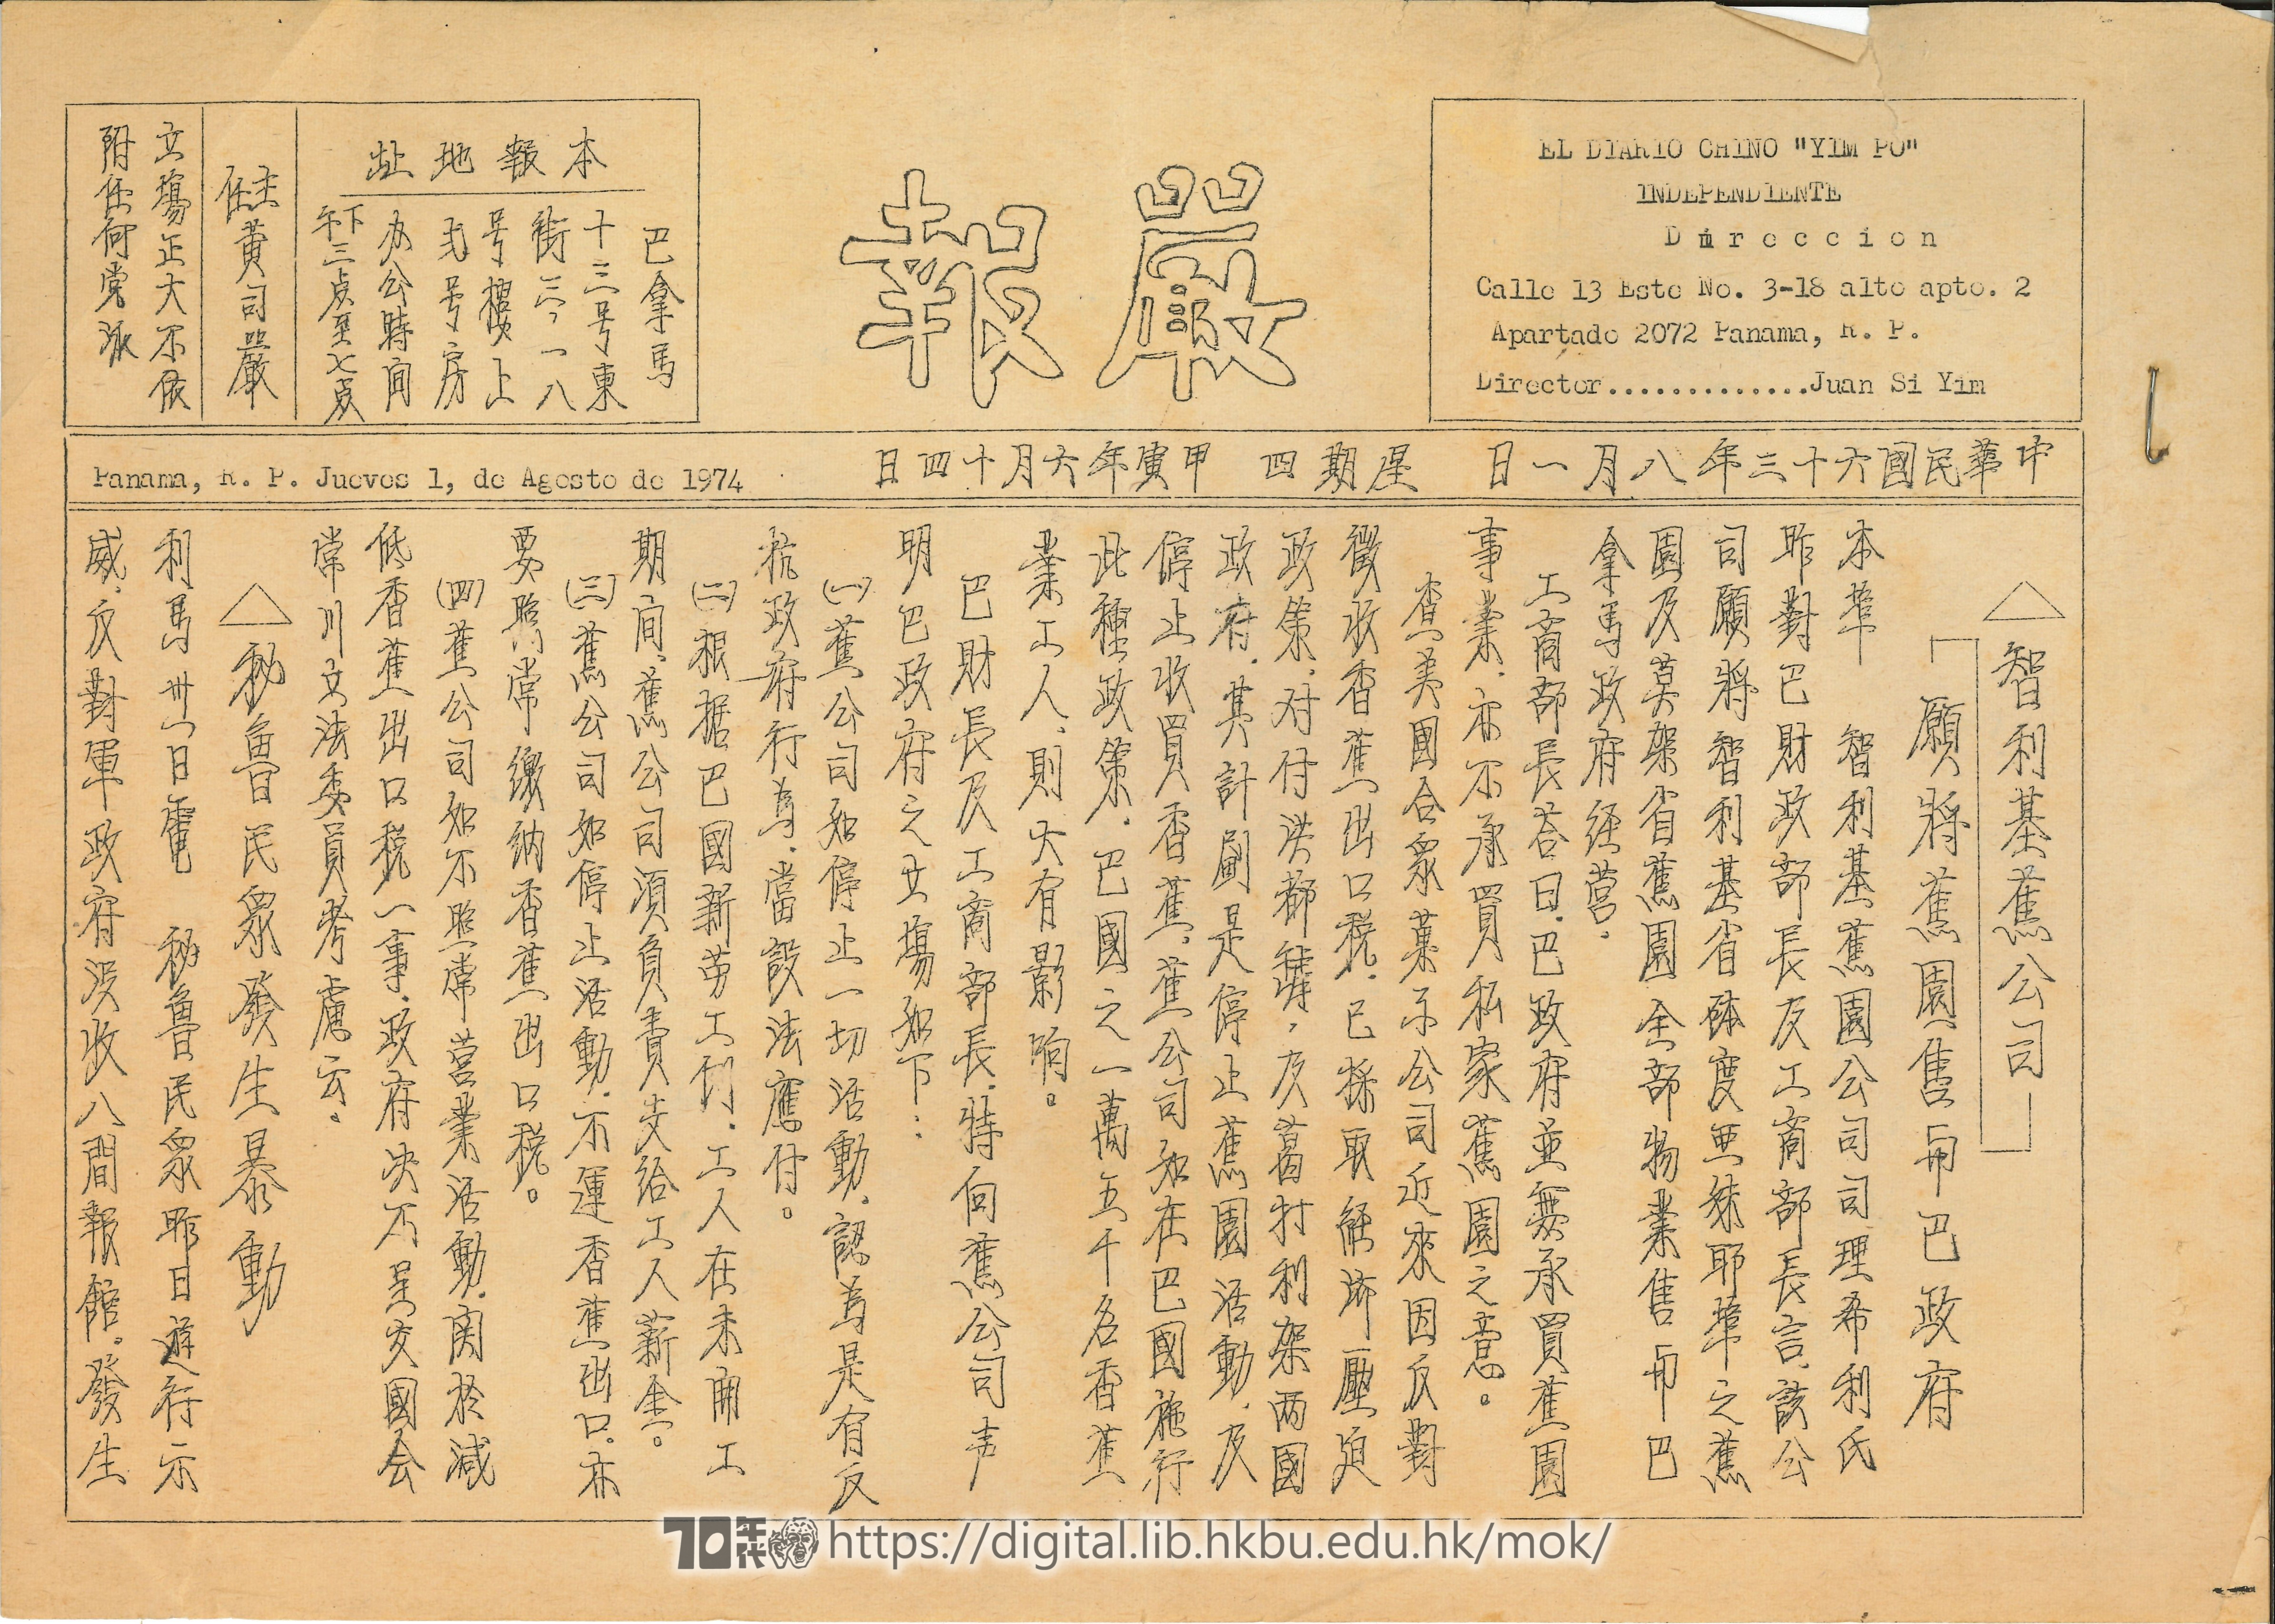   Letter from Hui-Ping Tang enclosing Chinese newspaper in Panama  